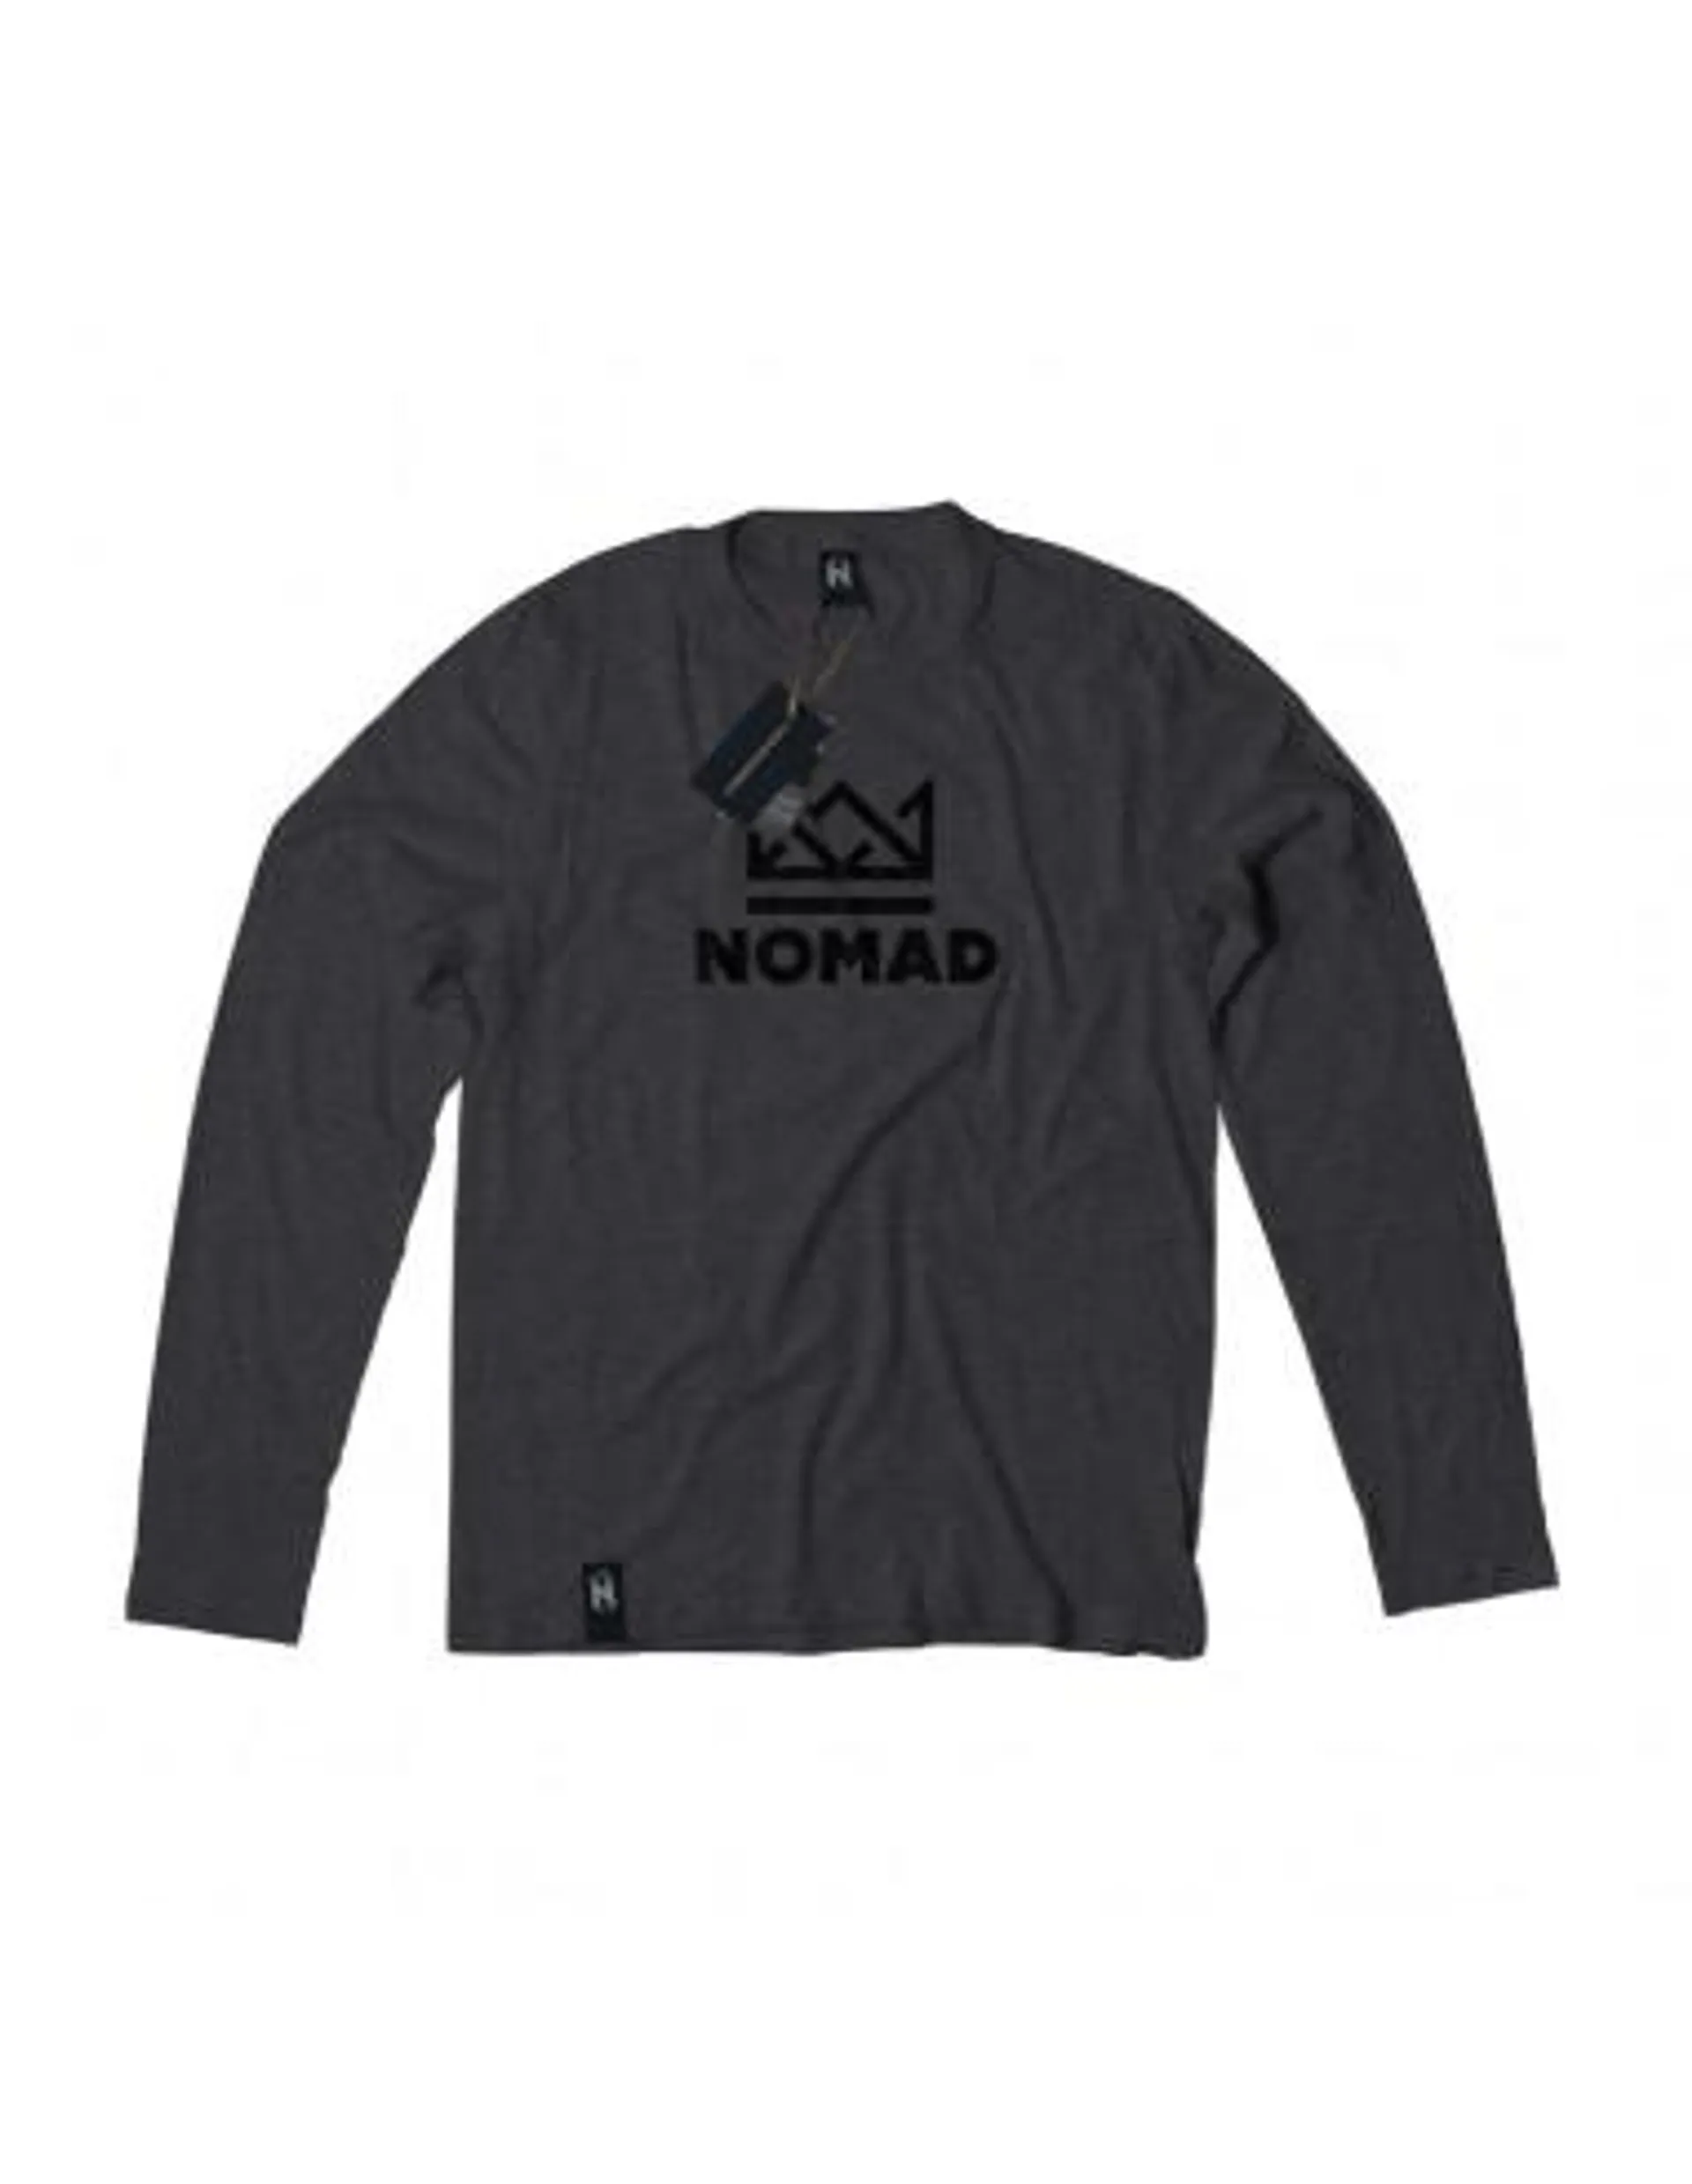 CROWN L/S TEE CHARCOAL WHITE